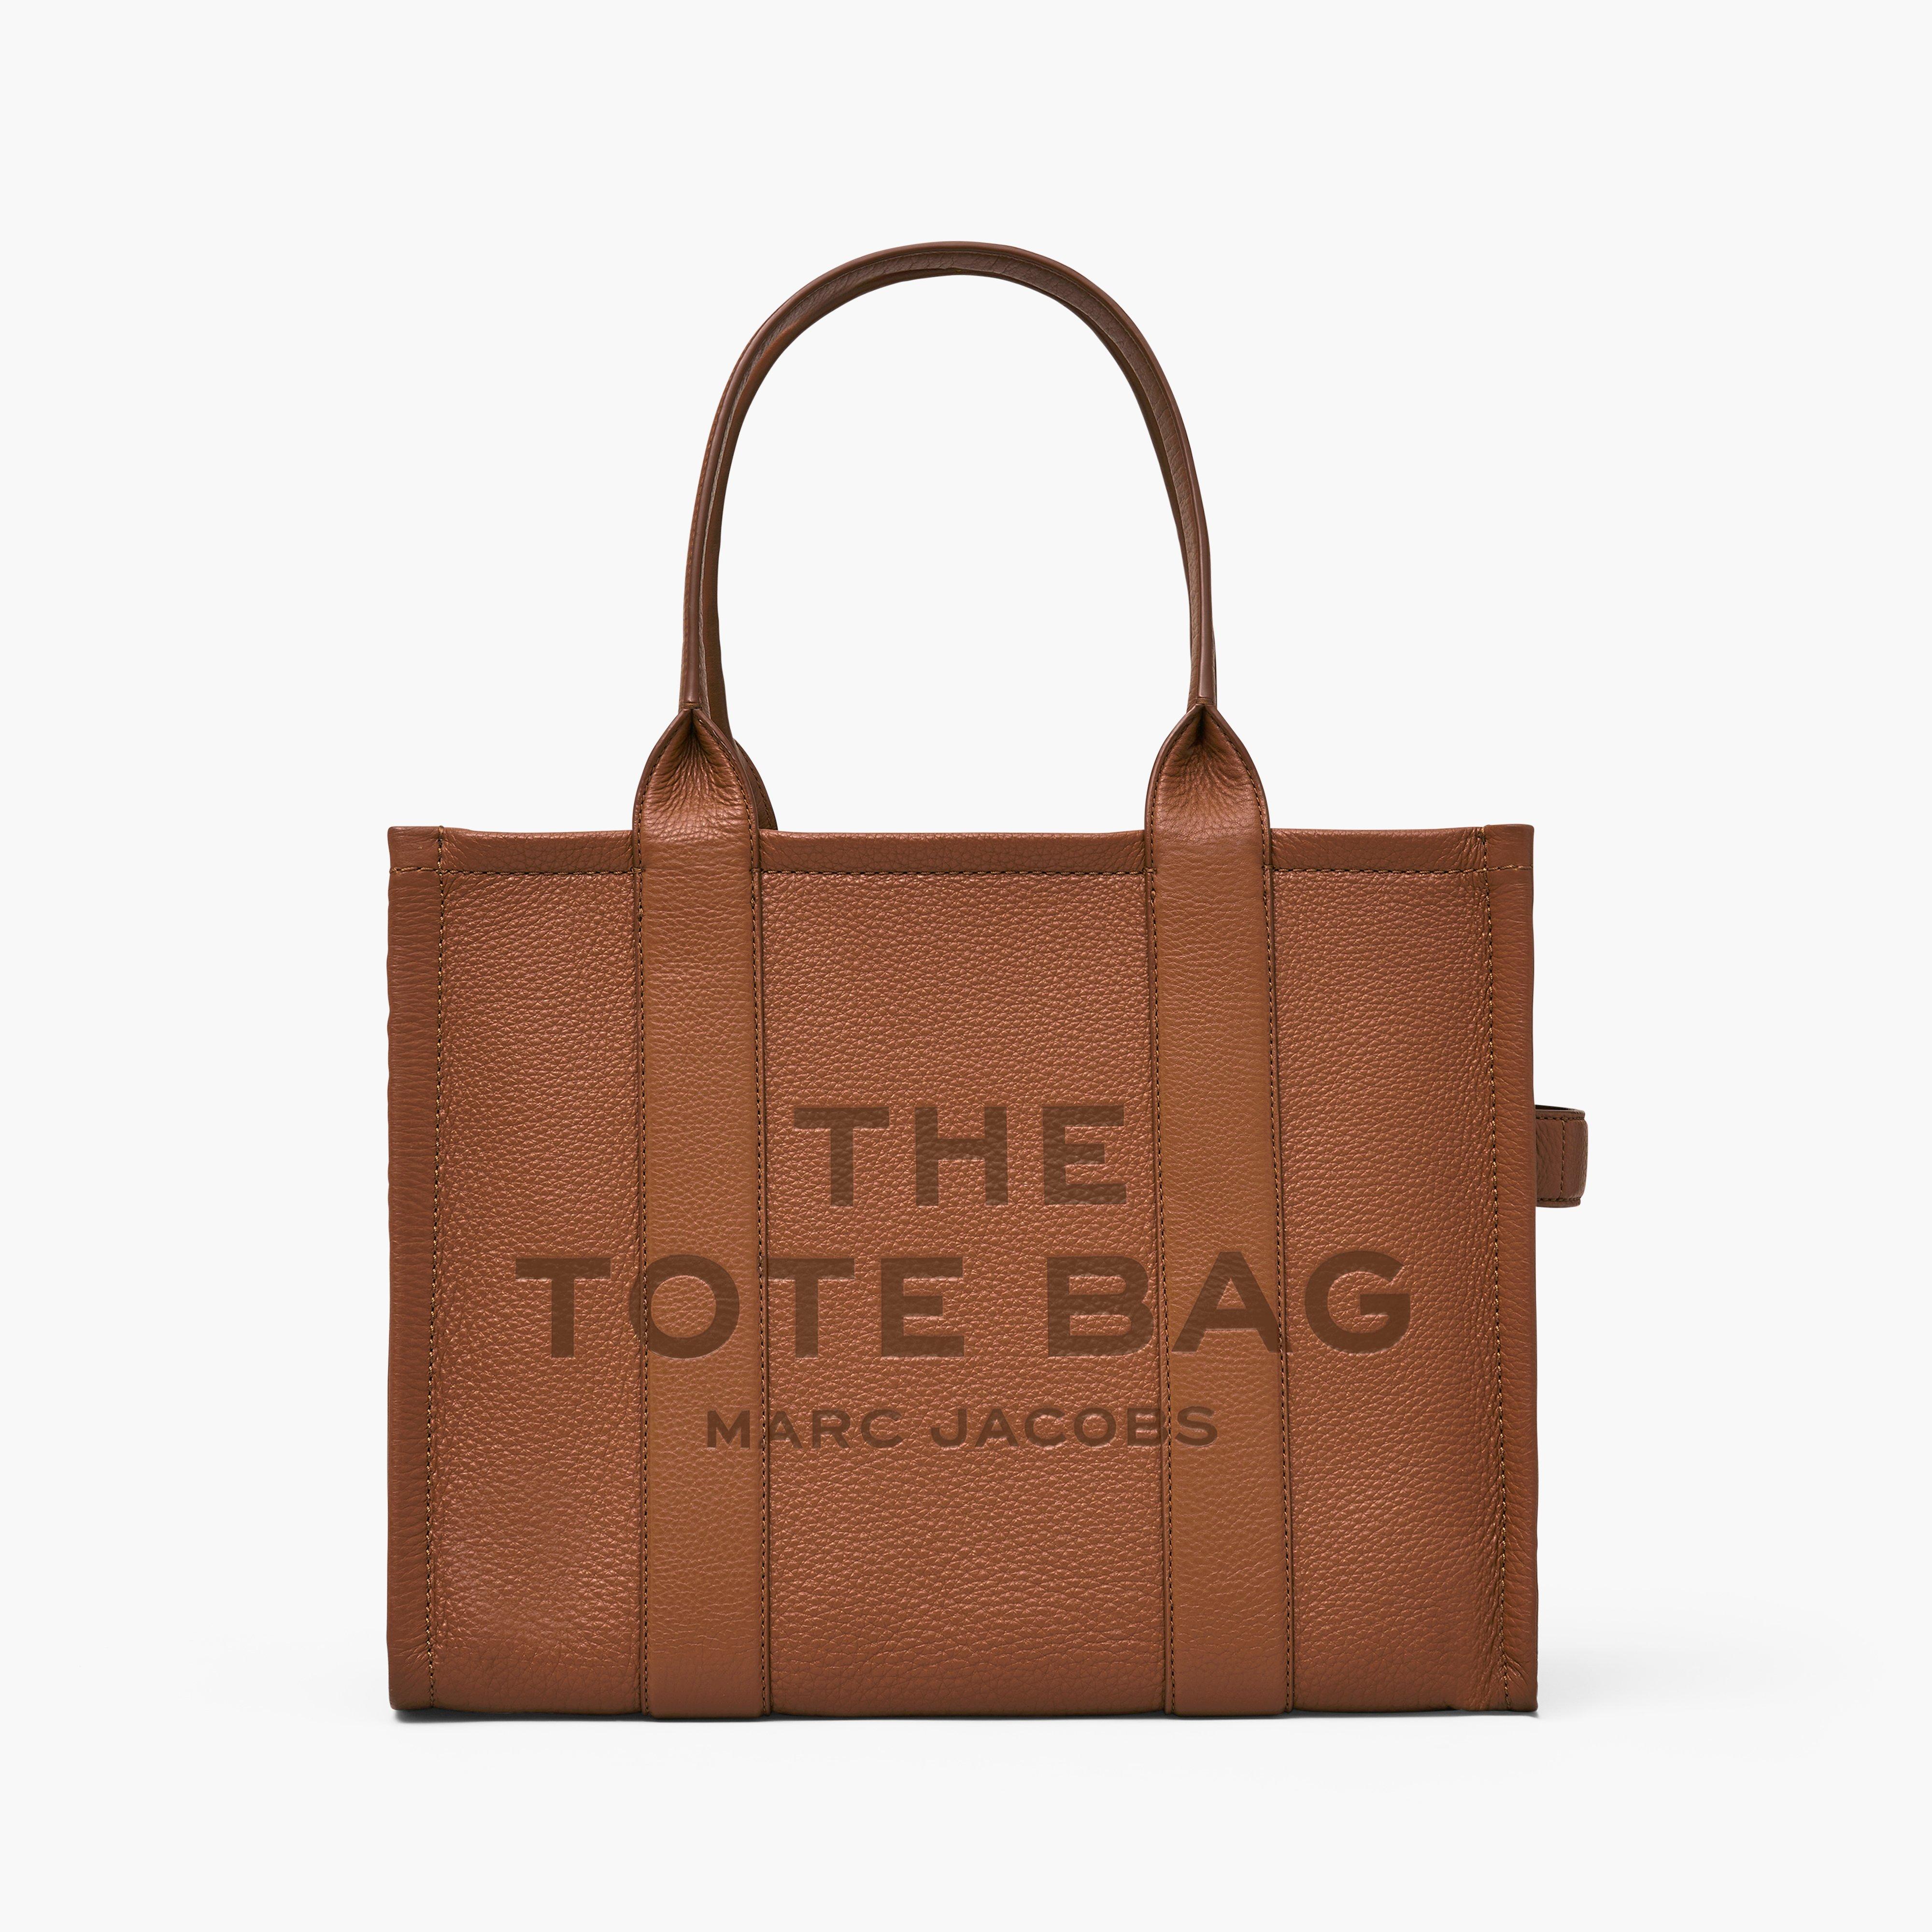 Marc by Marc jacobs The Leather Large Tote Bag,ARGAN OIL